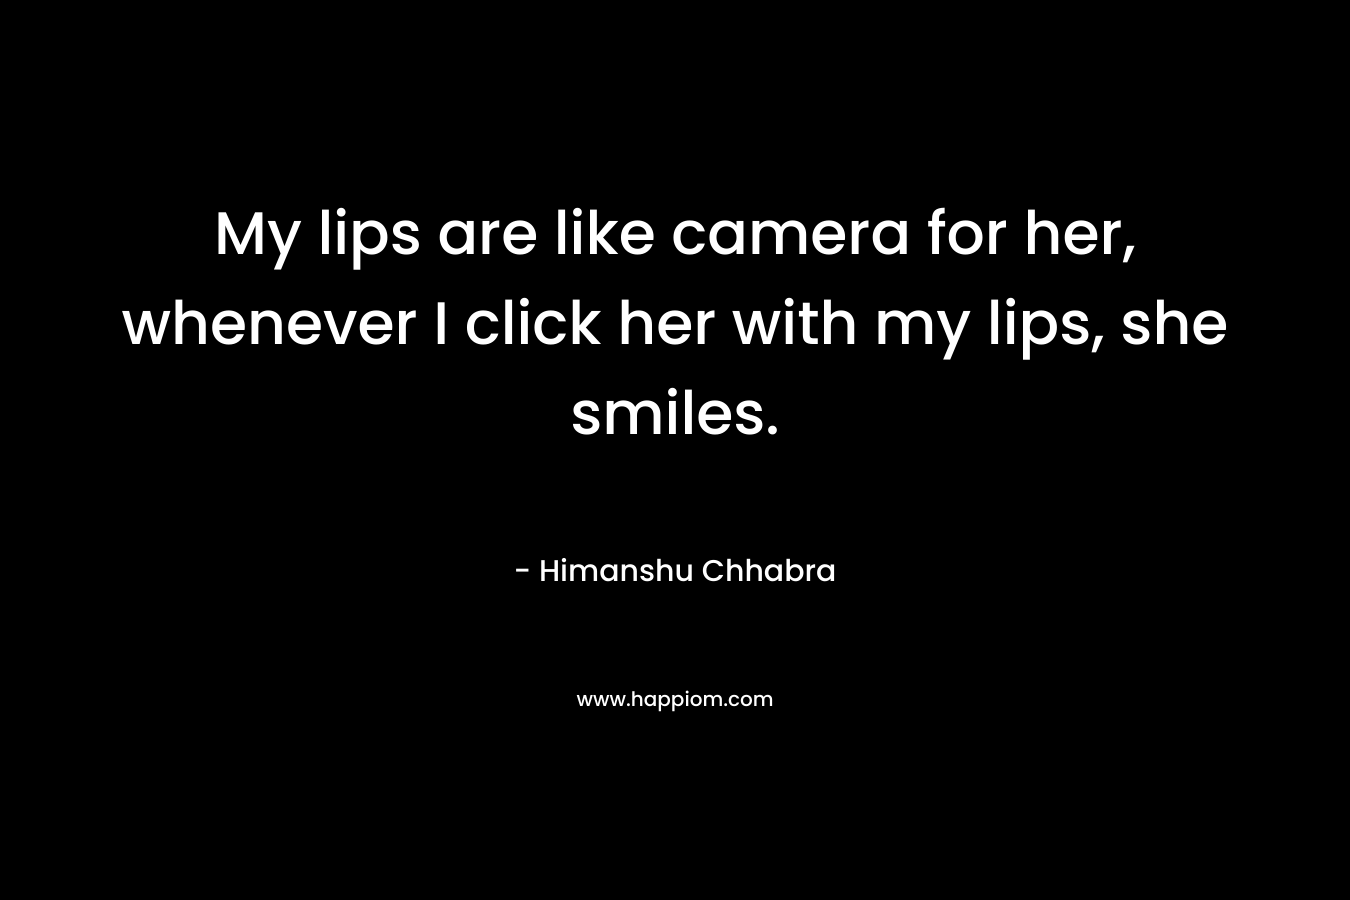 My lips are like camera for her, whenever I click her with my lips, she smiles. – Himanshu Chhabra